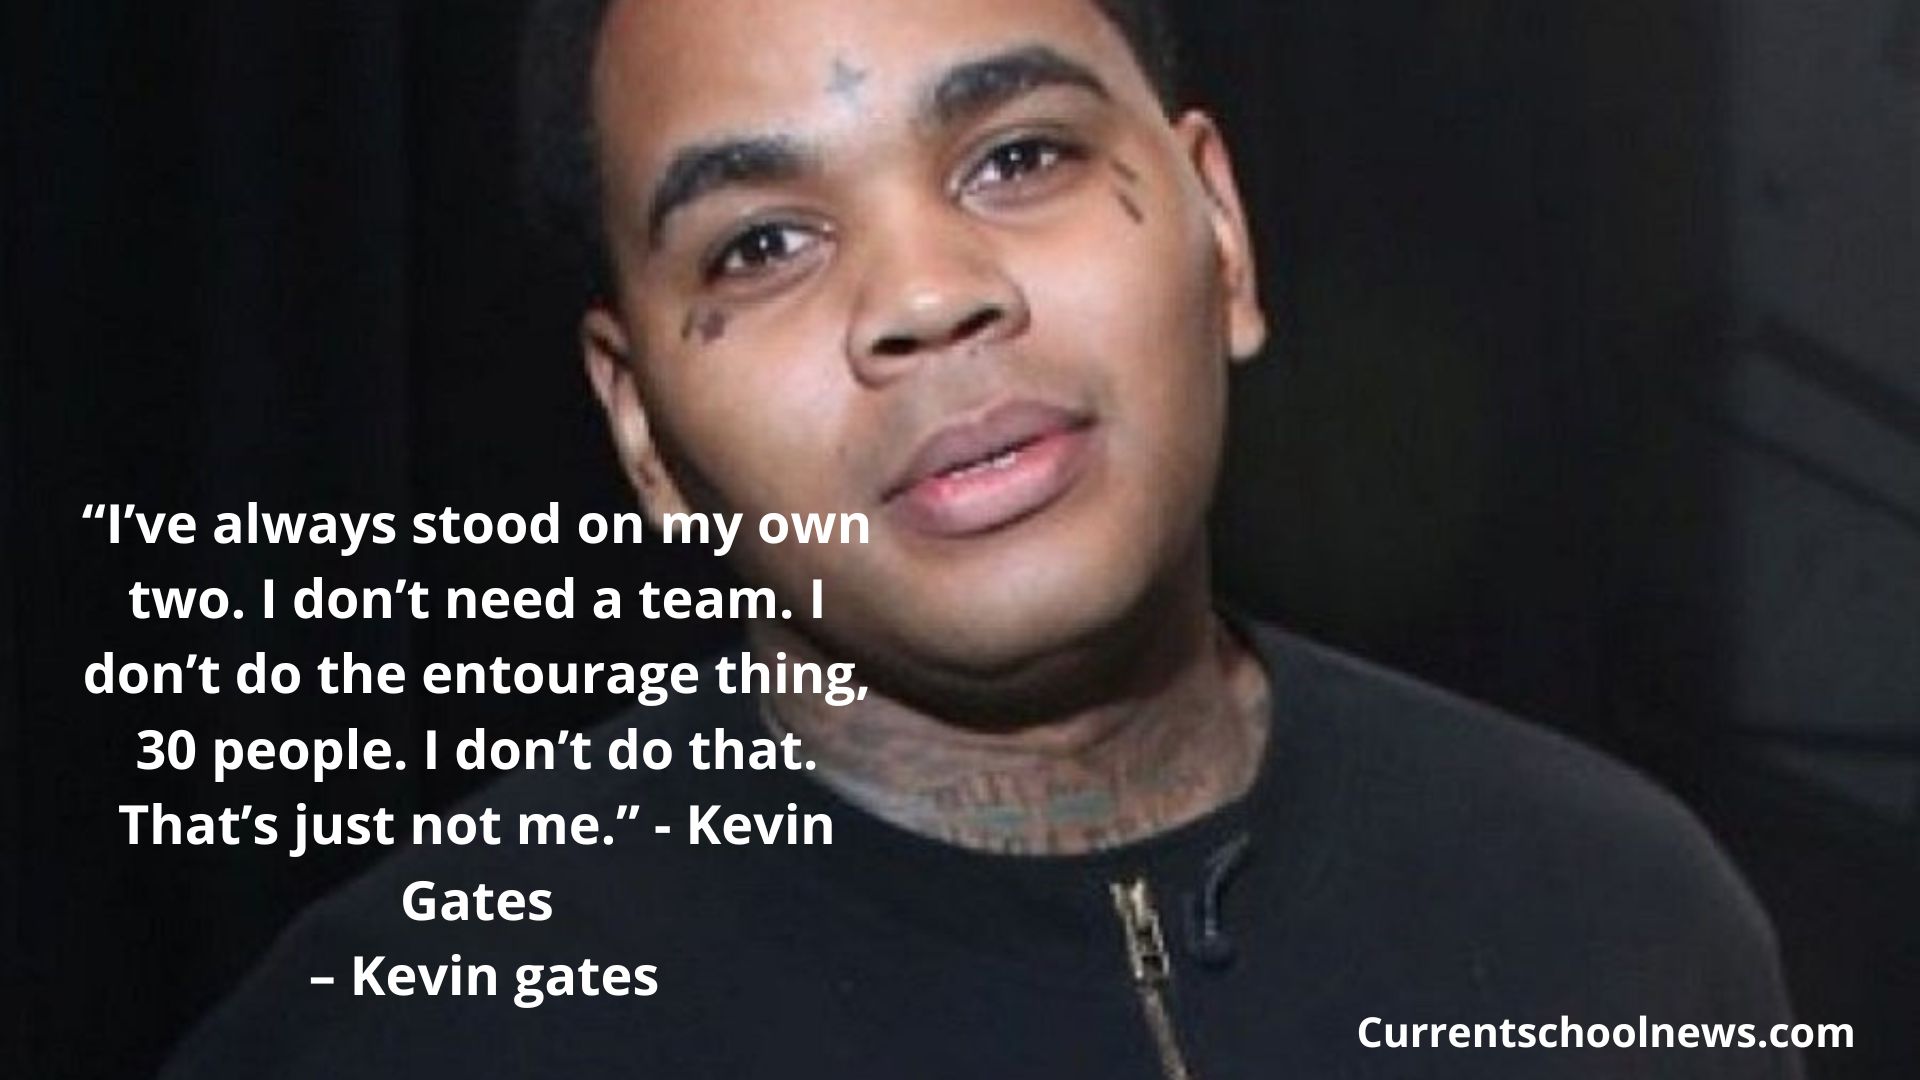 Kevin Gates Quotes about Love